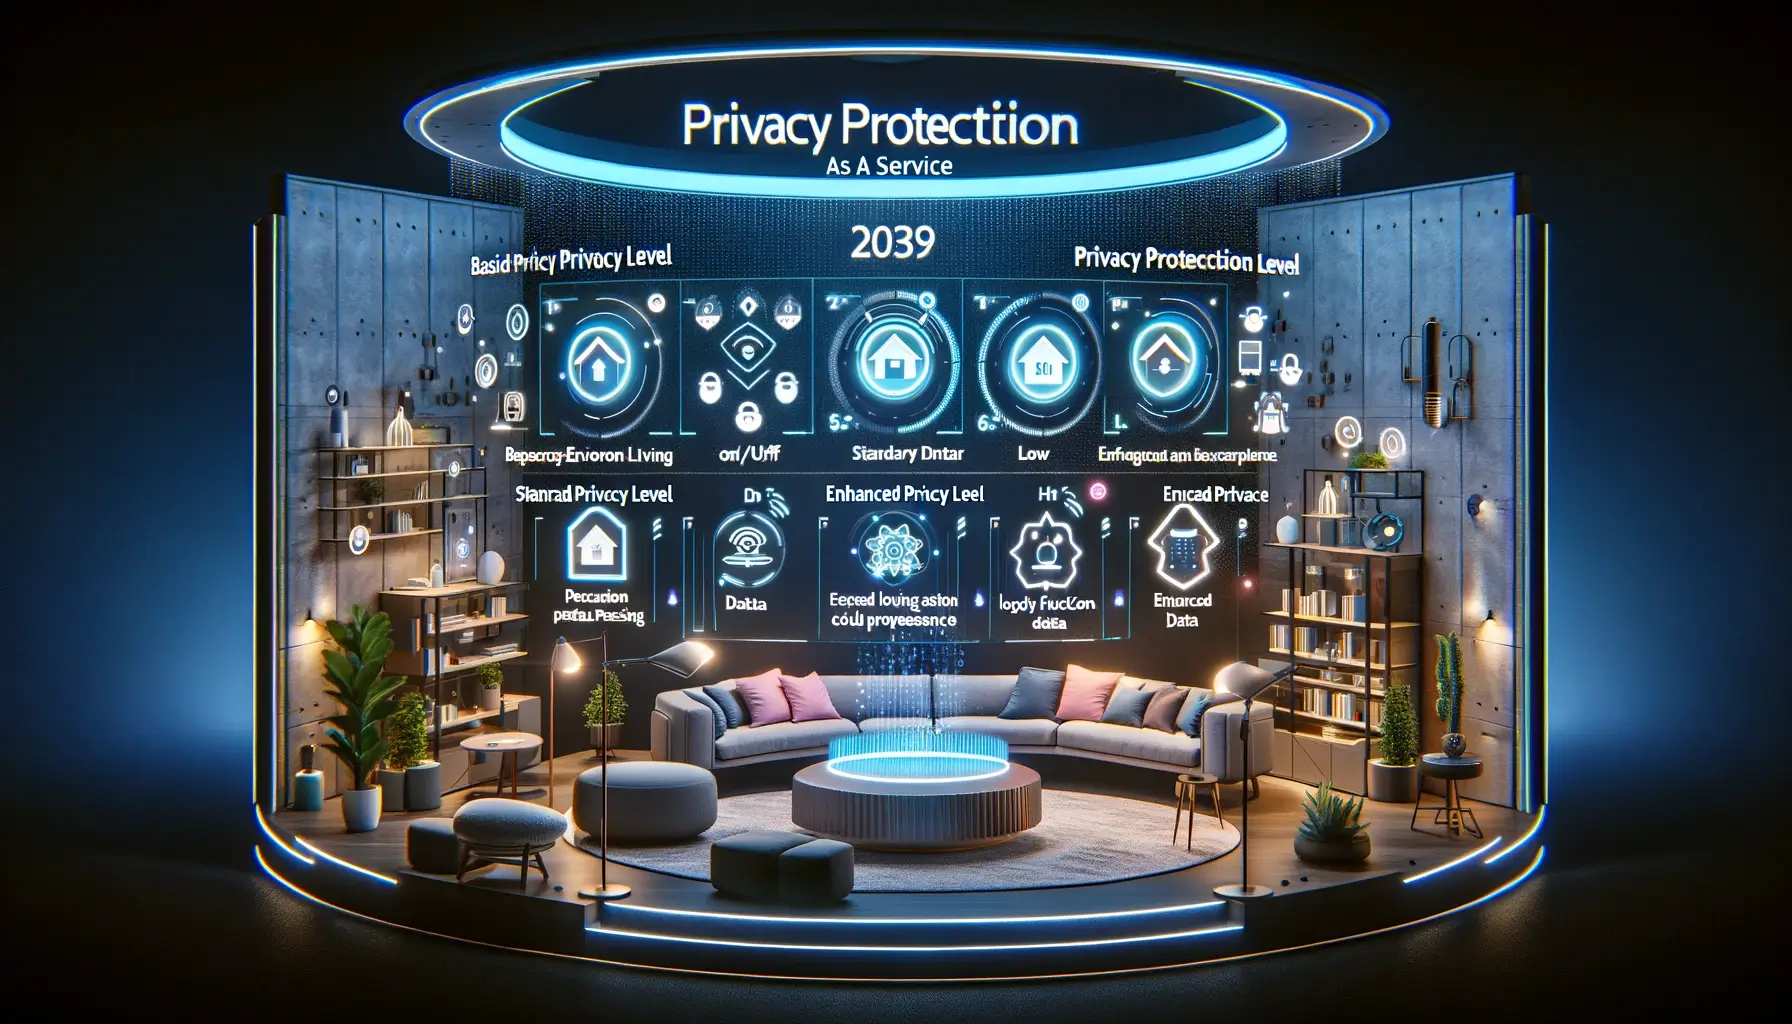 Home automated decision systems in 2039: an exploration of privacy and control